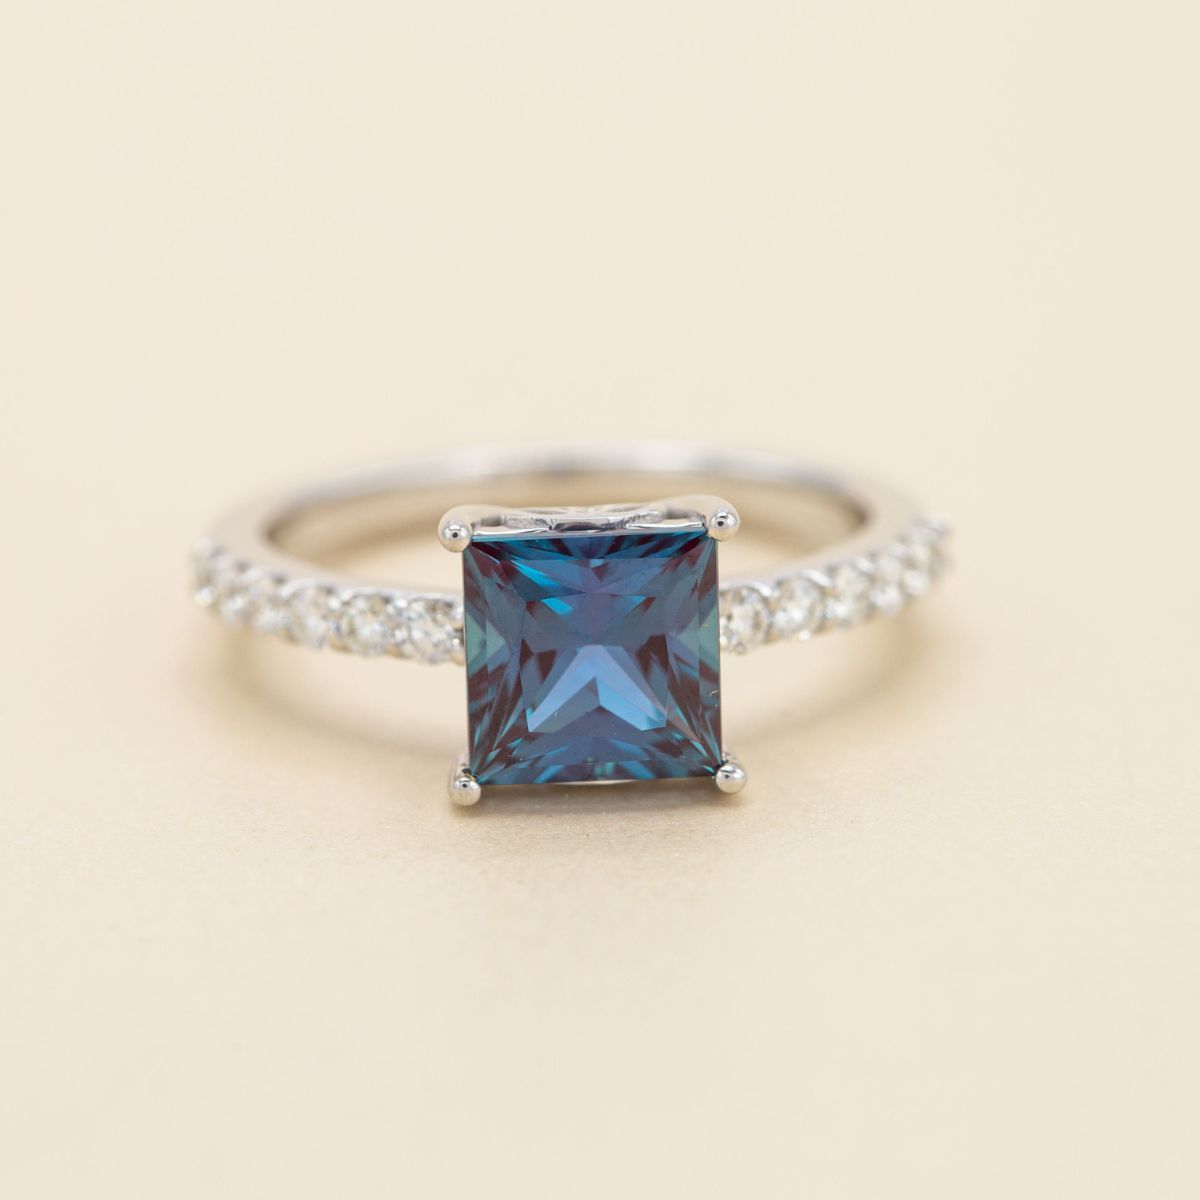 How to pick the perfect alexandrite | CustomMade.com